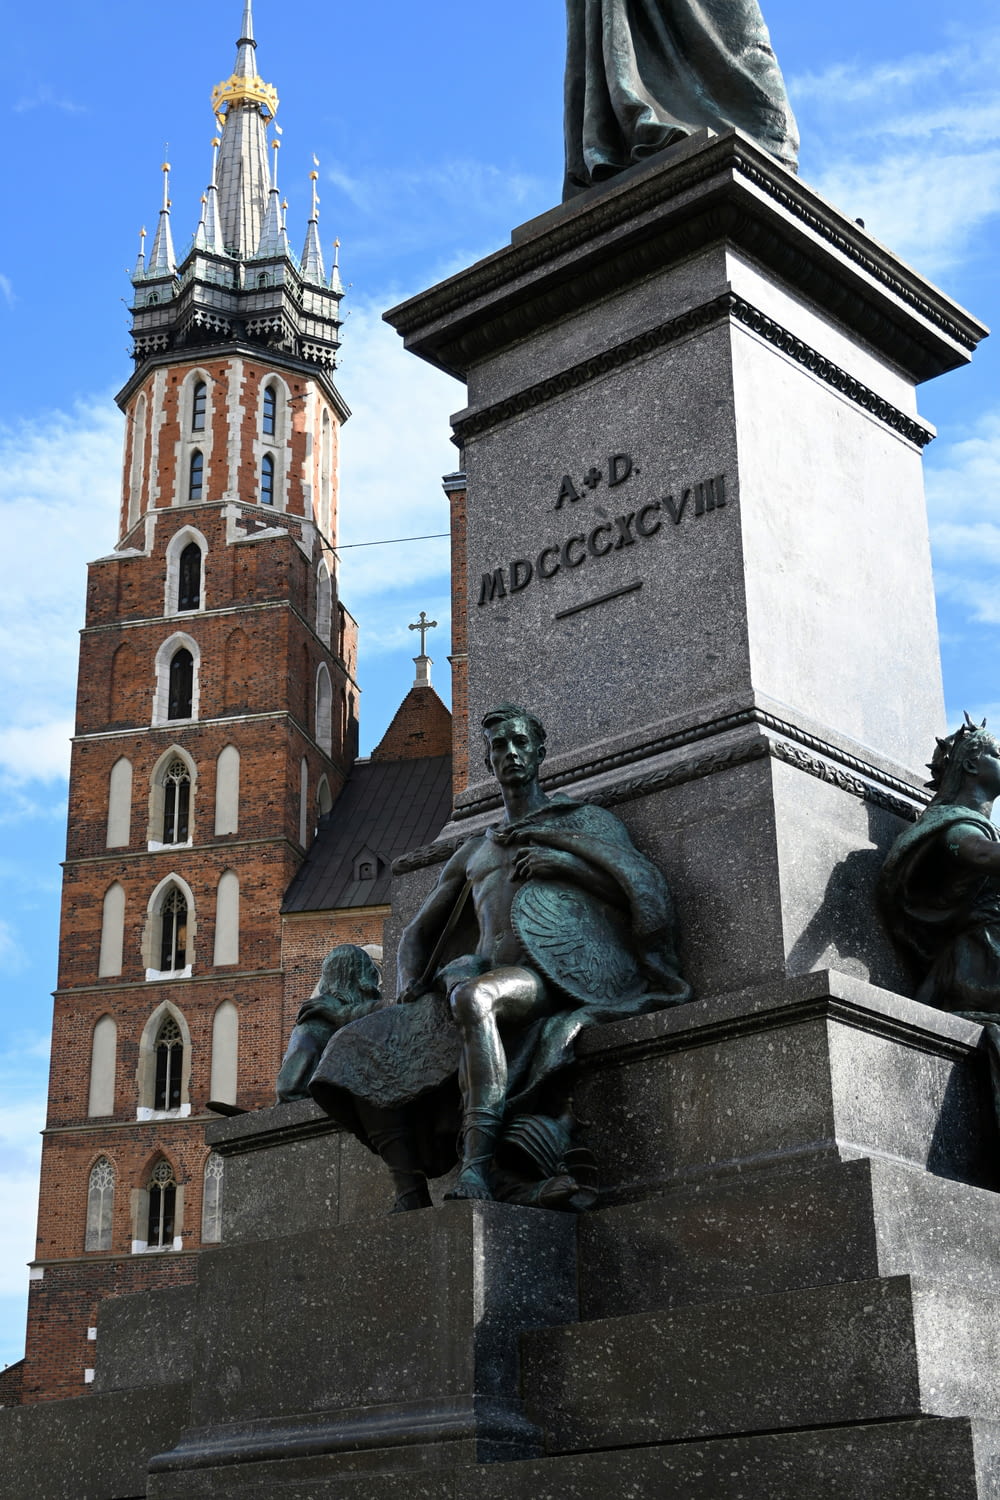 a statue in front of a tall building with a clock tower